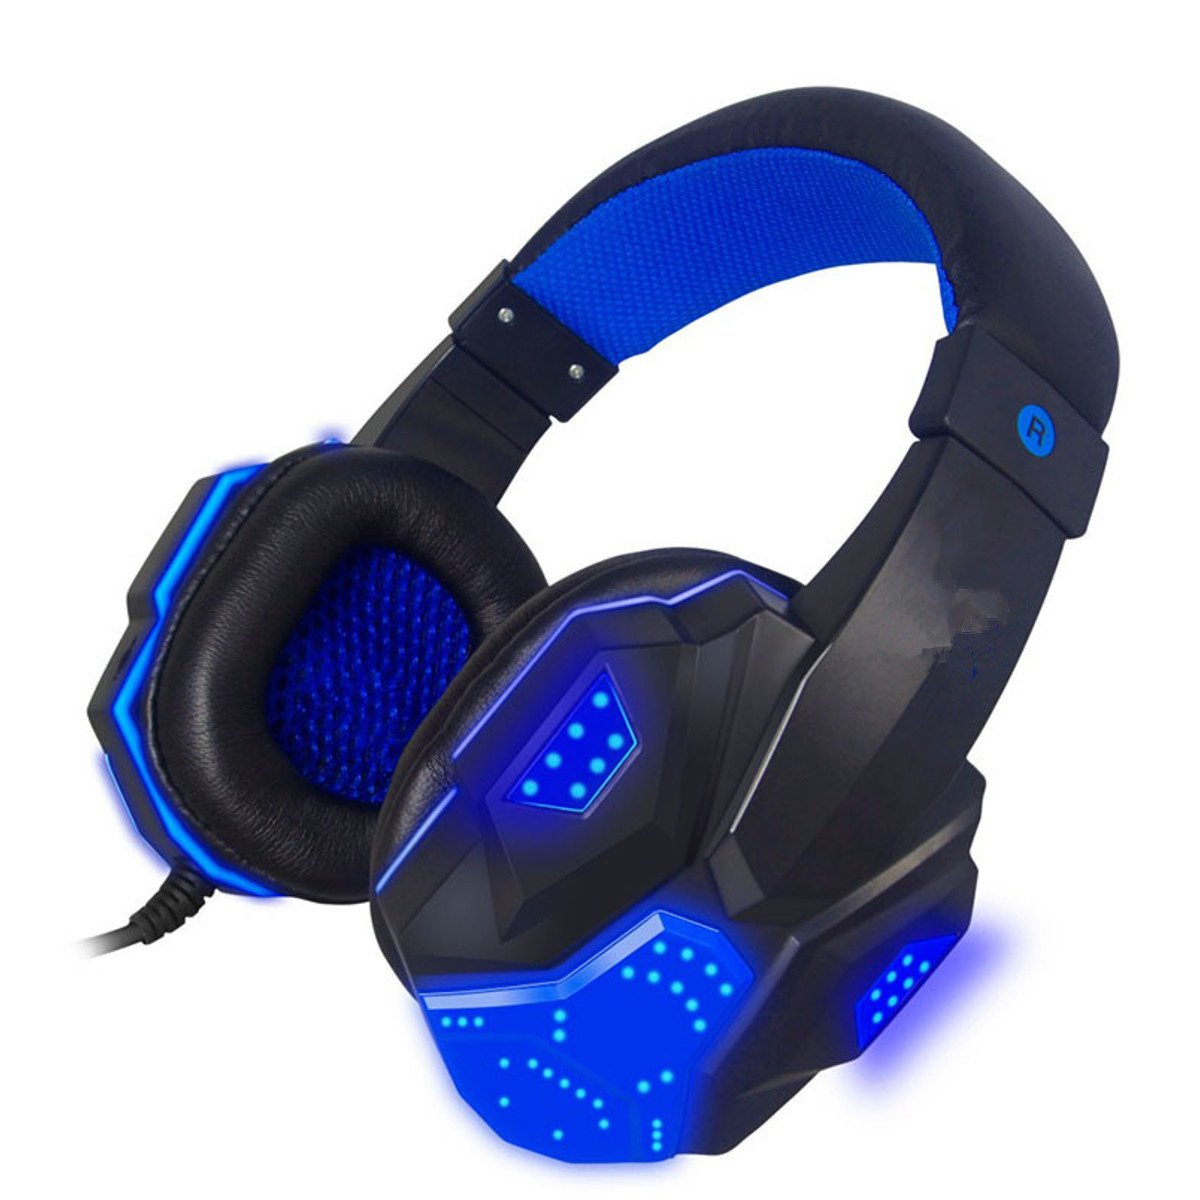 3.5mm USB Wired Gaming Headband Headphone with LED Light Surround Stereo Headset for XBOX PS4 Game Console Computer 2